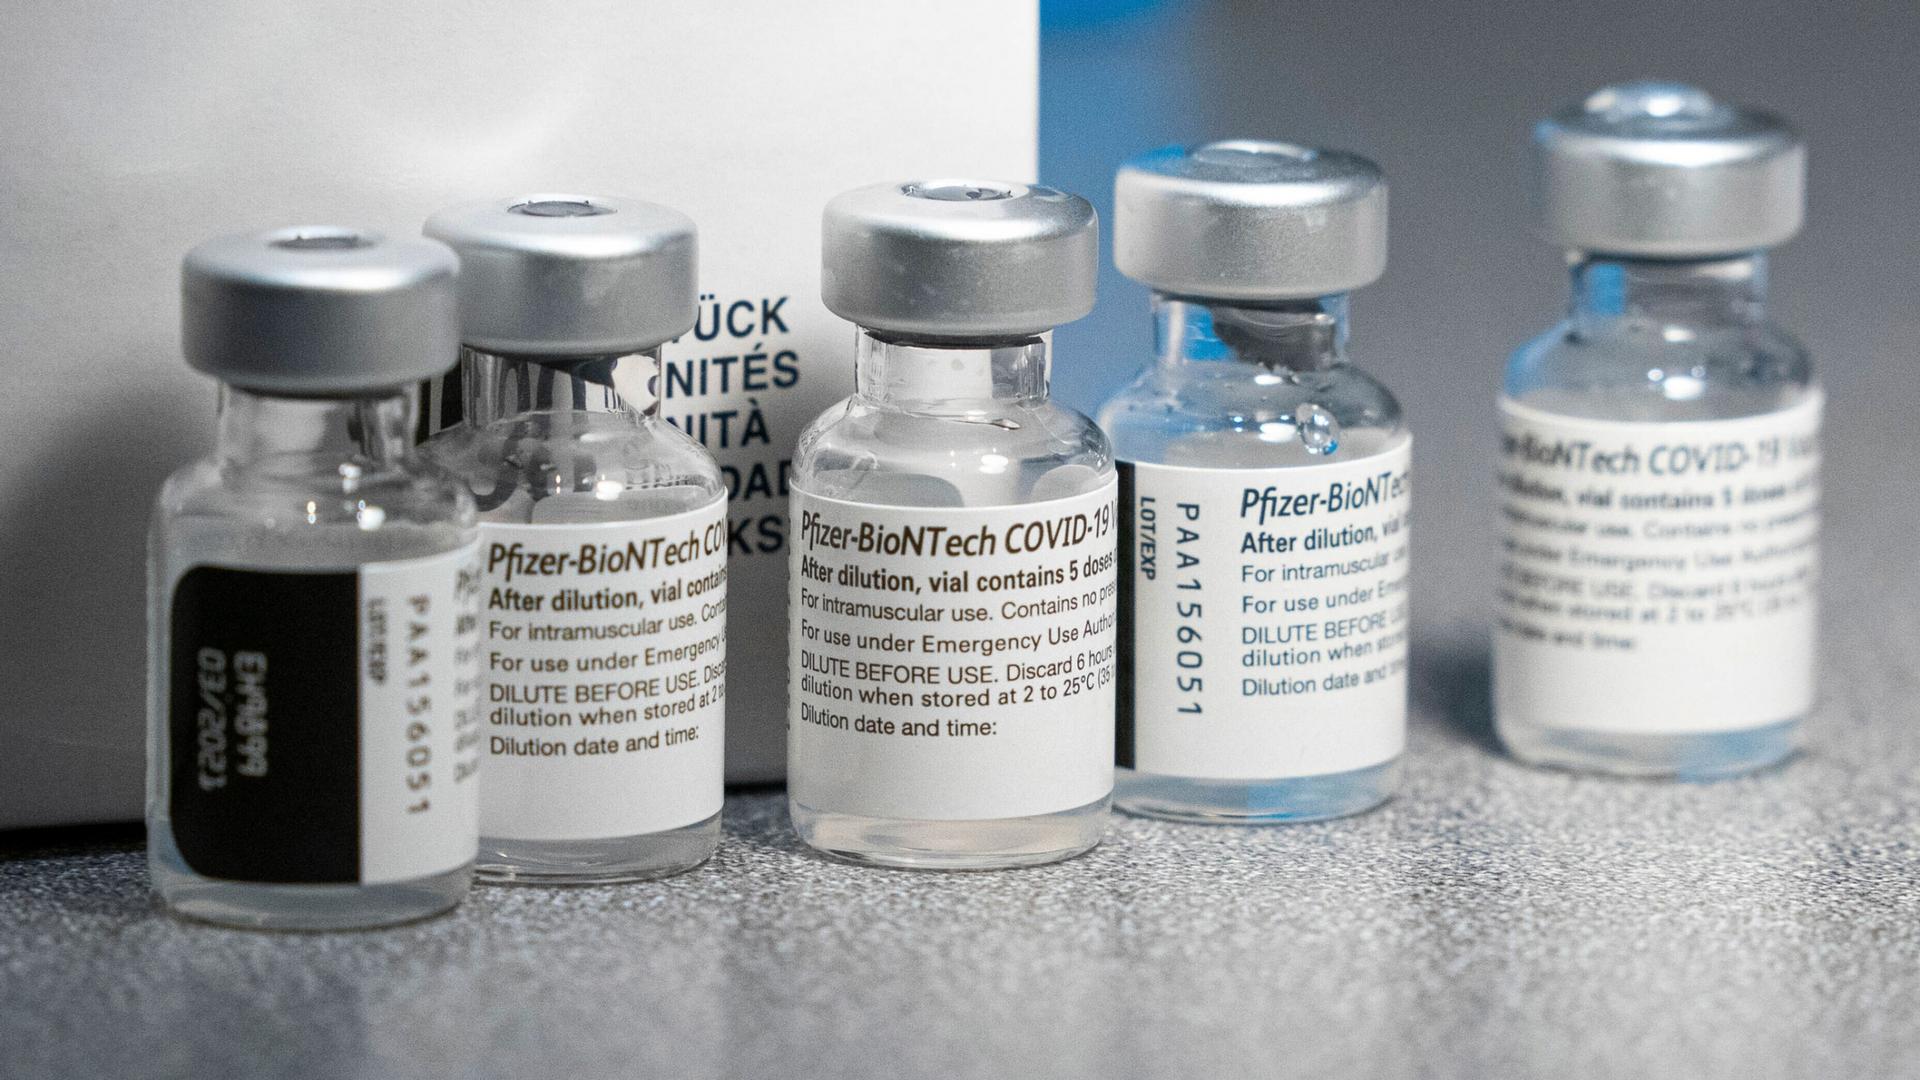 Five clear-glass vials are shown with labels showing that they are the Pfizer-BioNTech COVID-19 vaccine.